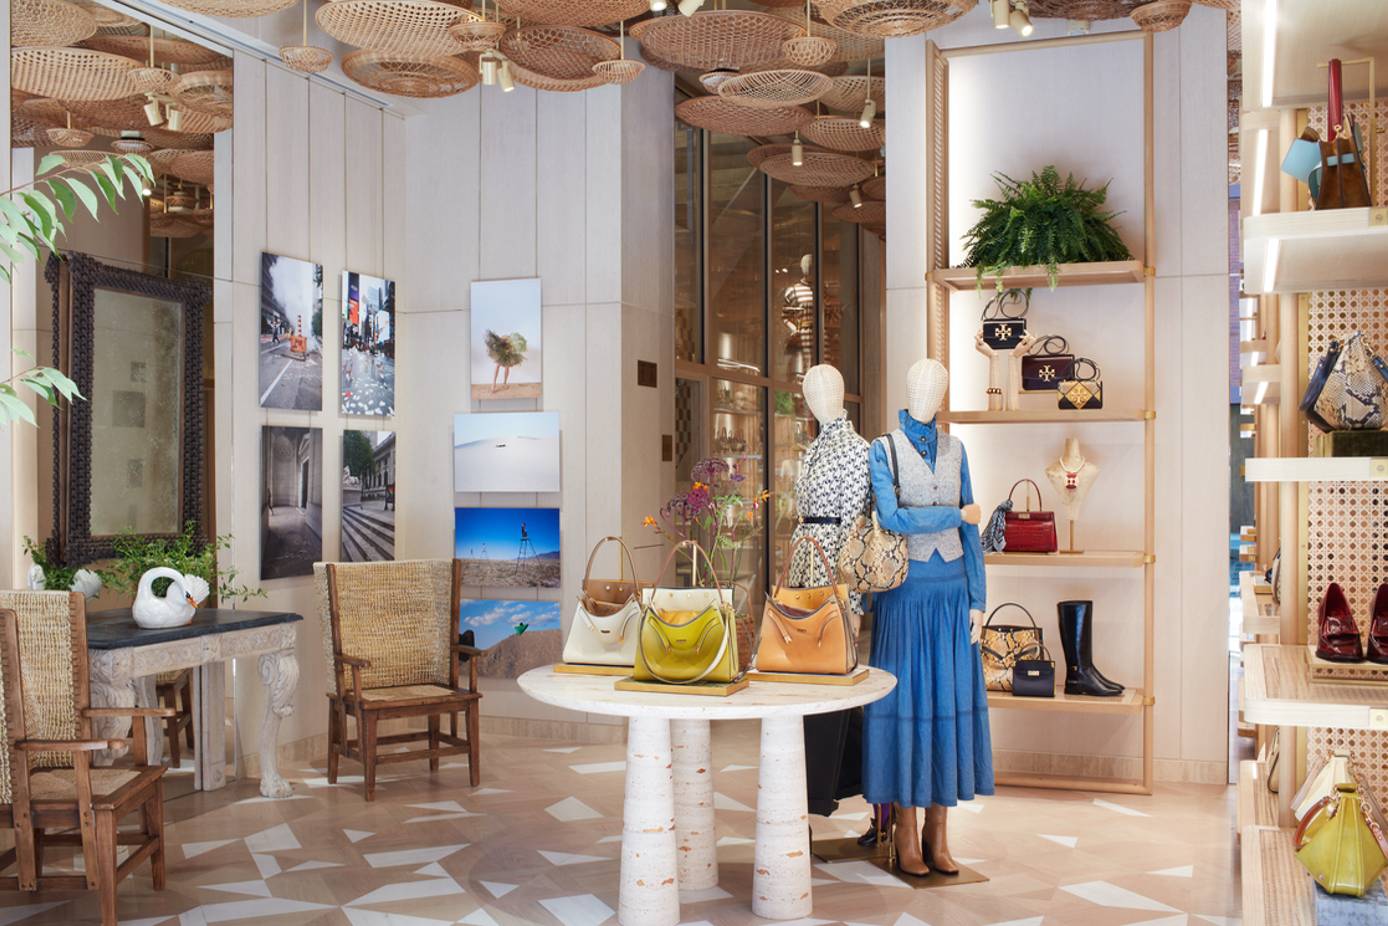 Tory Burch: New concept store in mercher street - iXtenso – retail trends